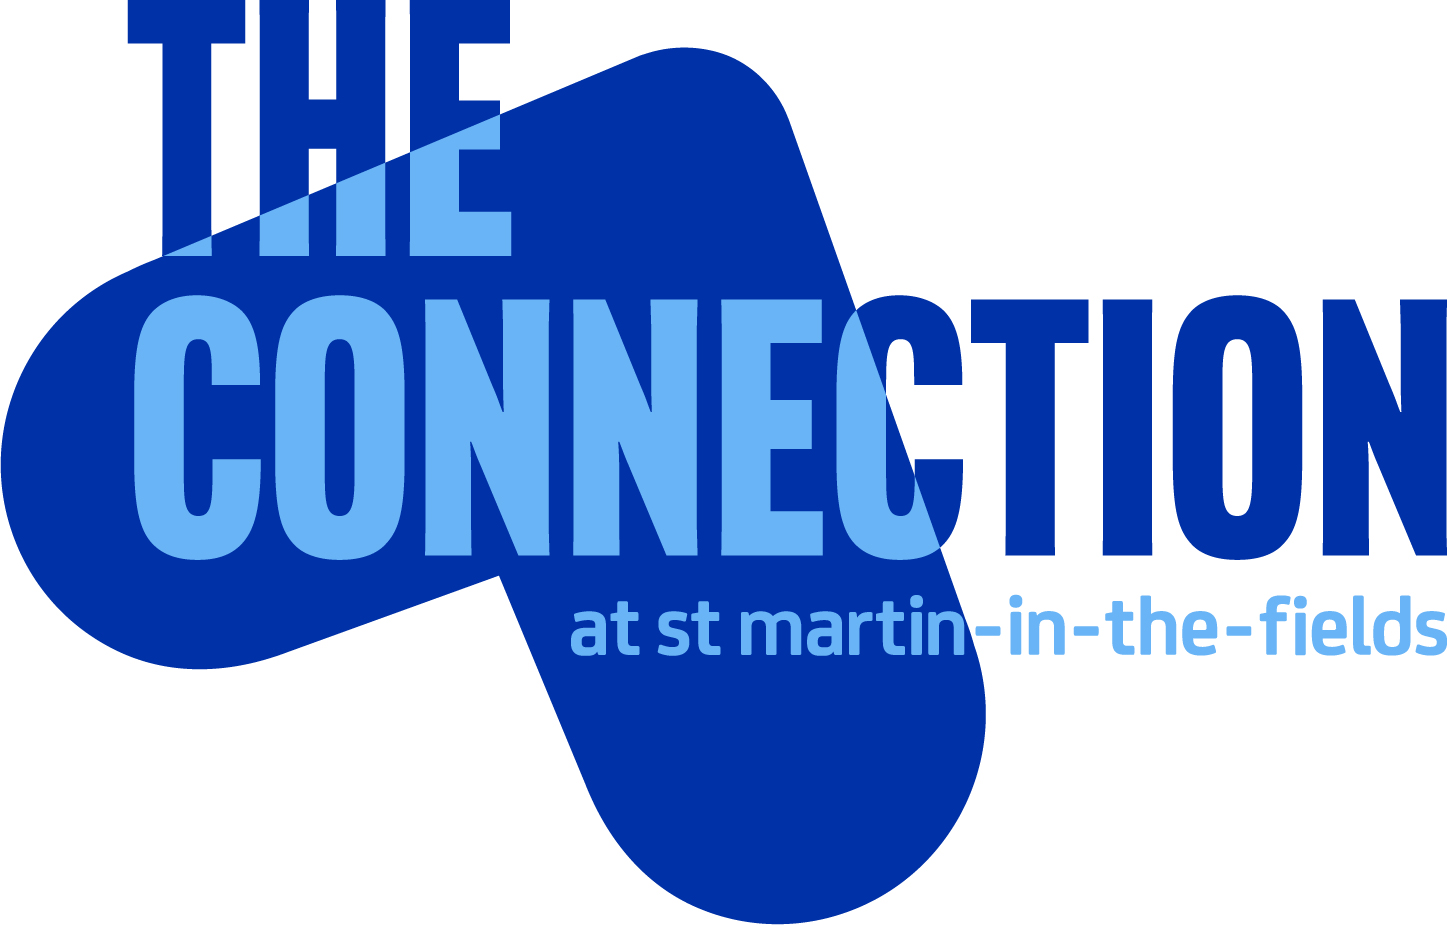 The Connection at St Martin’s are recruiting for a migration advisor